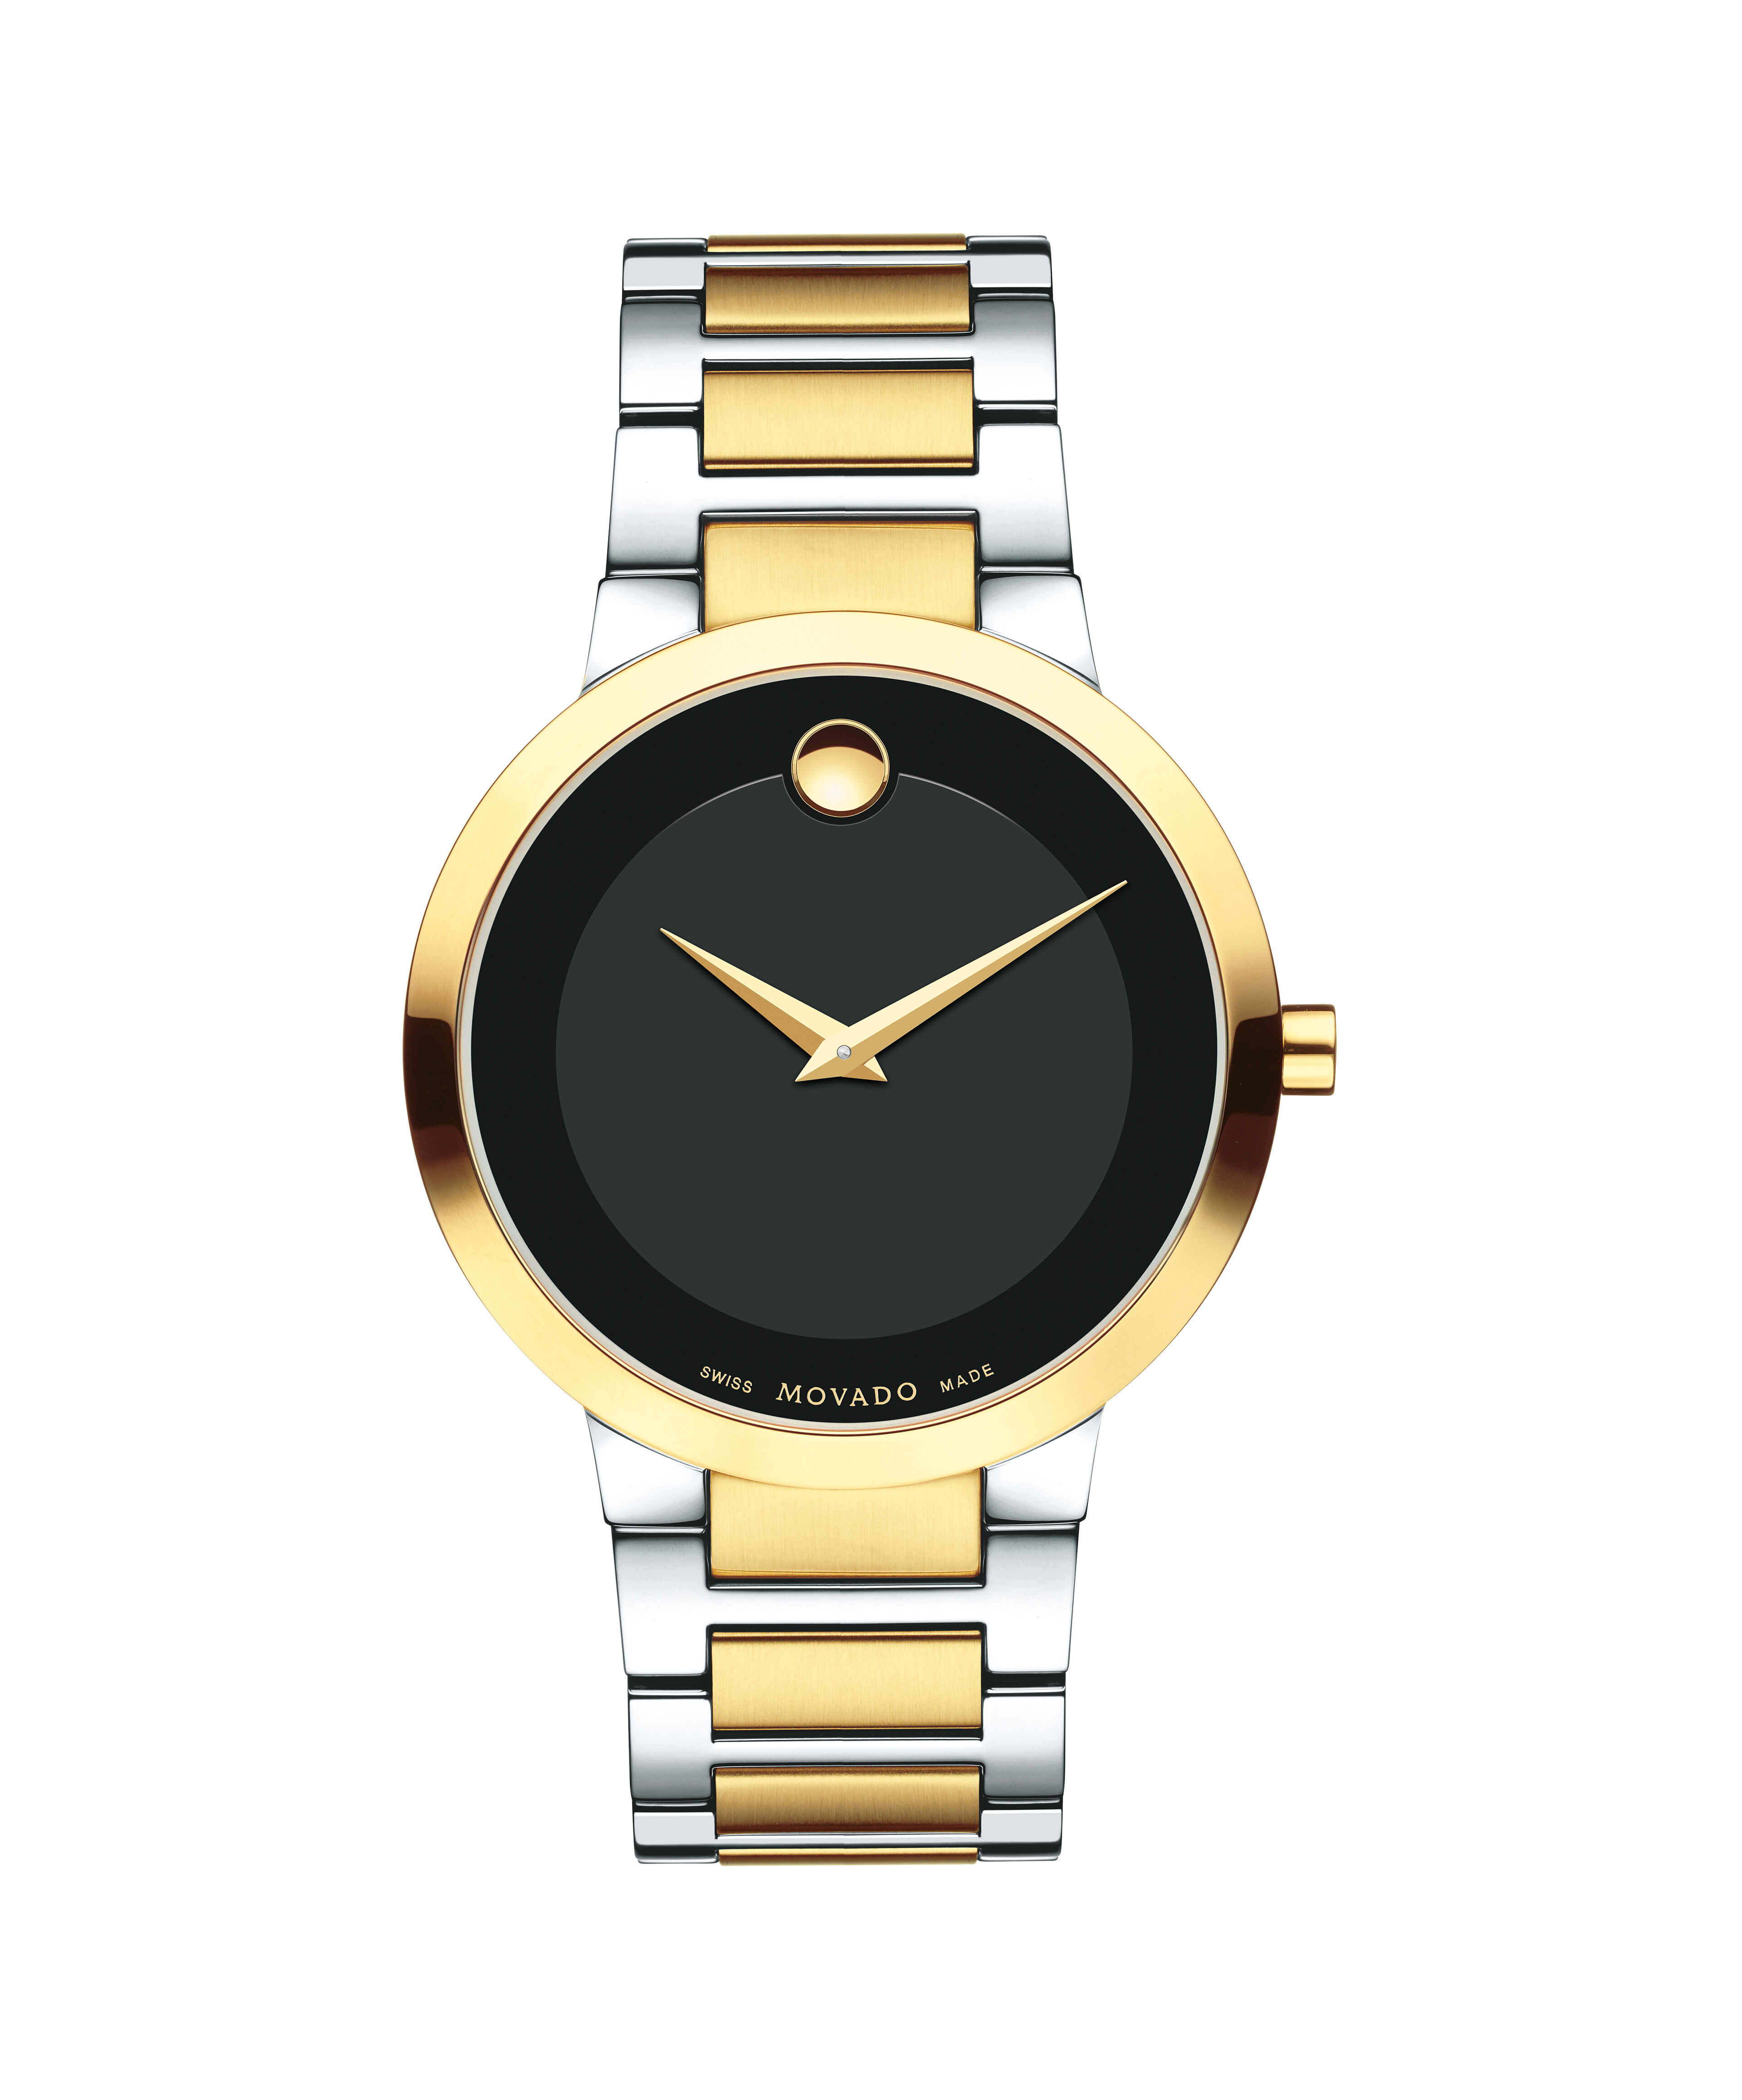 Movado Vizio 84.C5.898 Unisex Watch in Stainless Steel